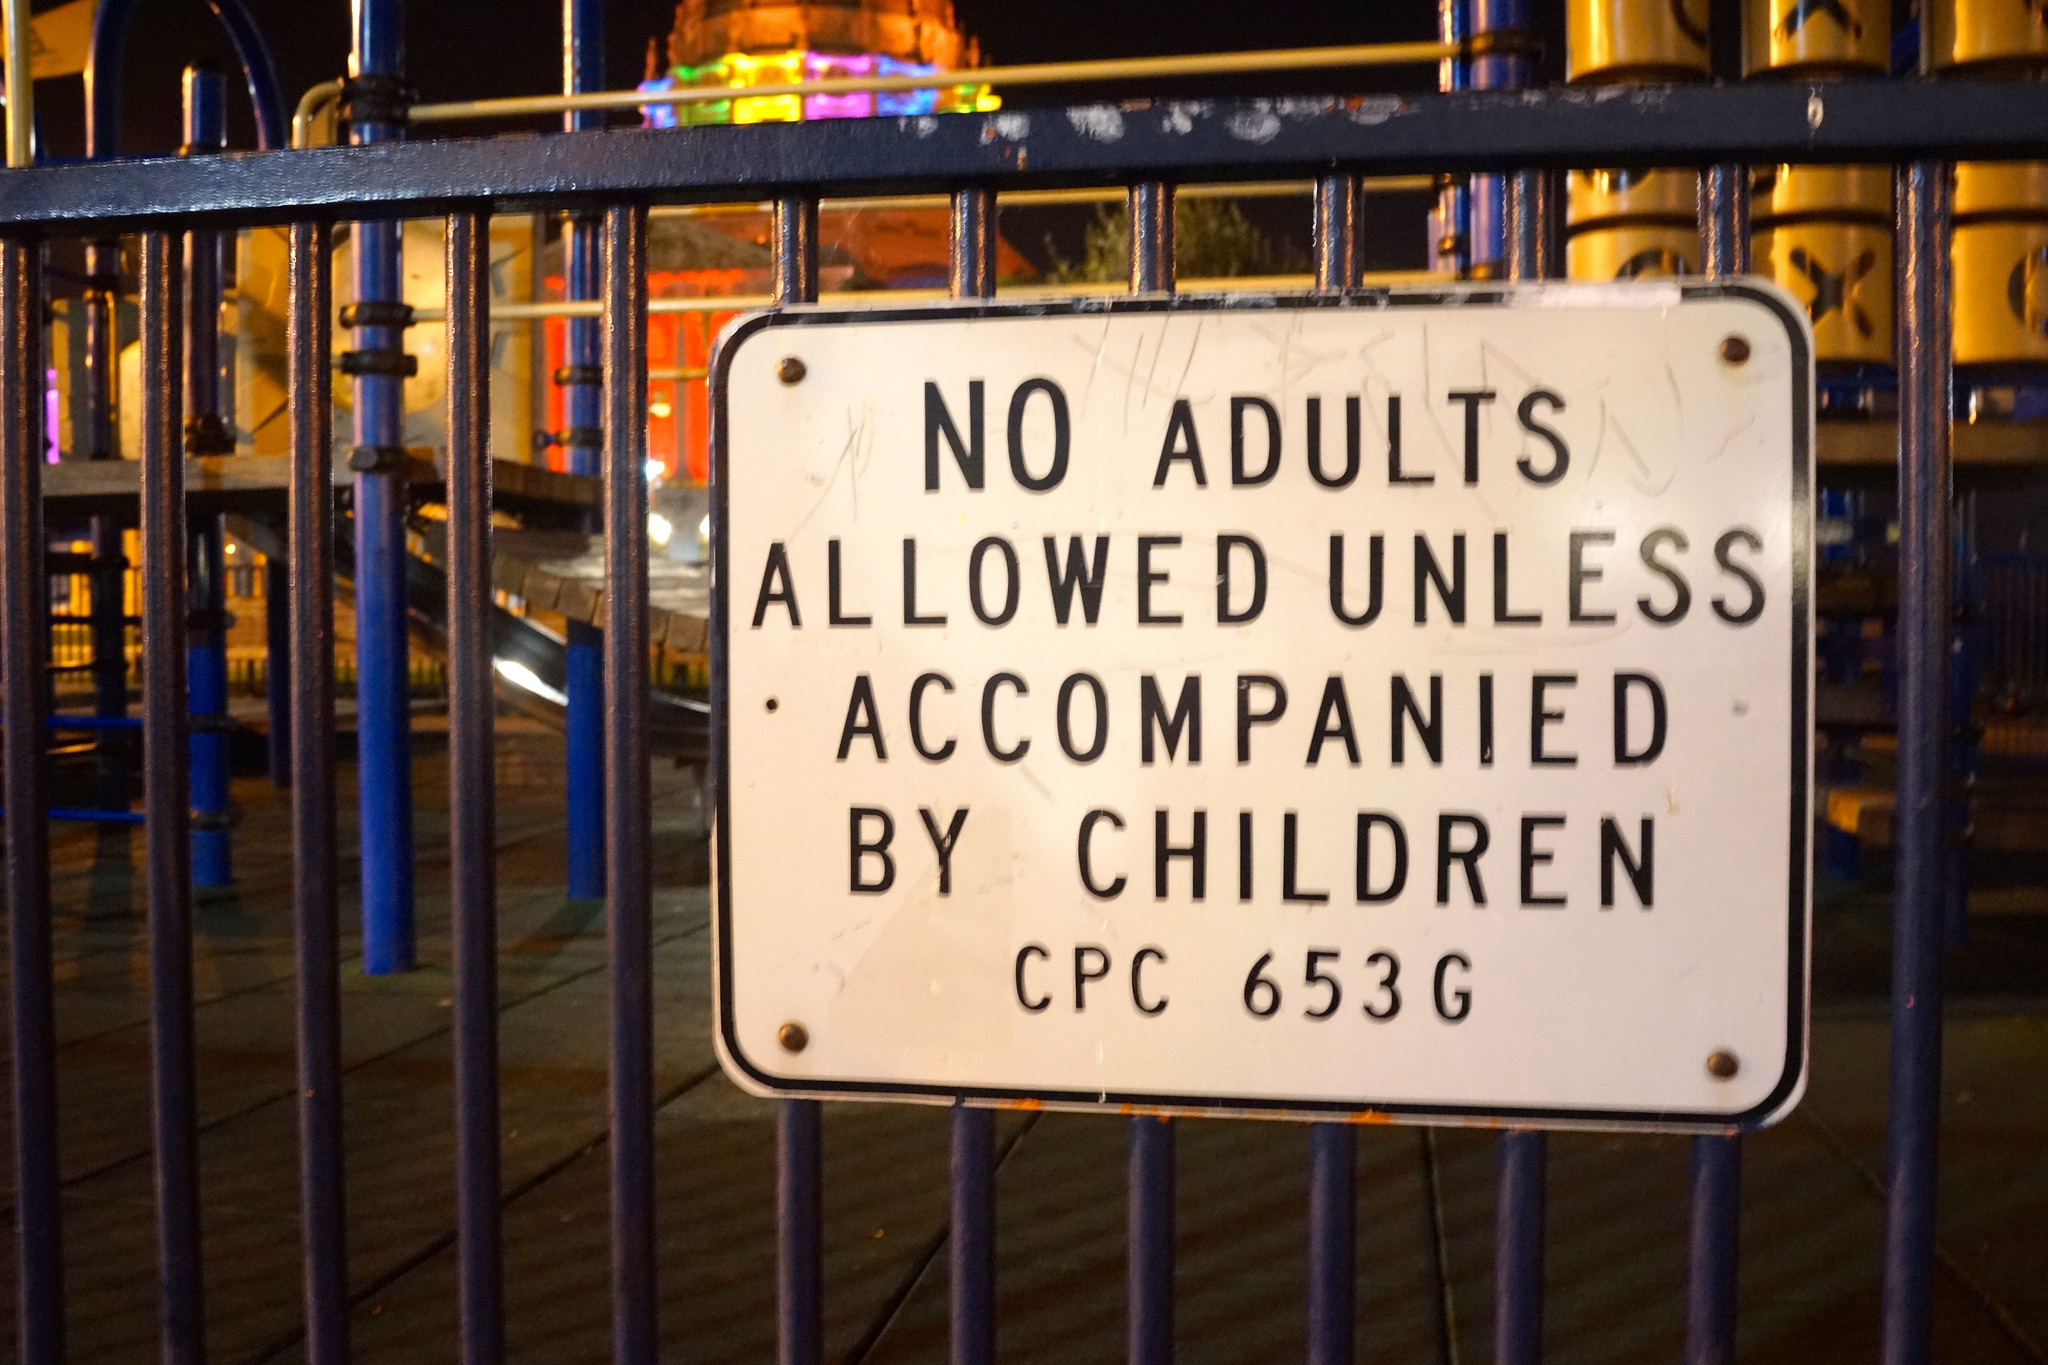 A sign next to a children's play area reading No Adults Allowed Unless Accompanied By Children